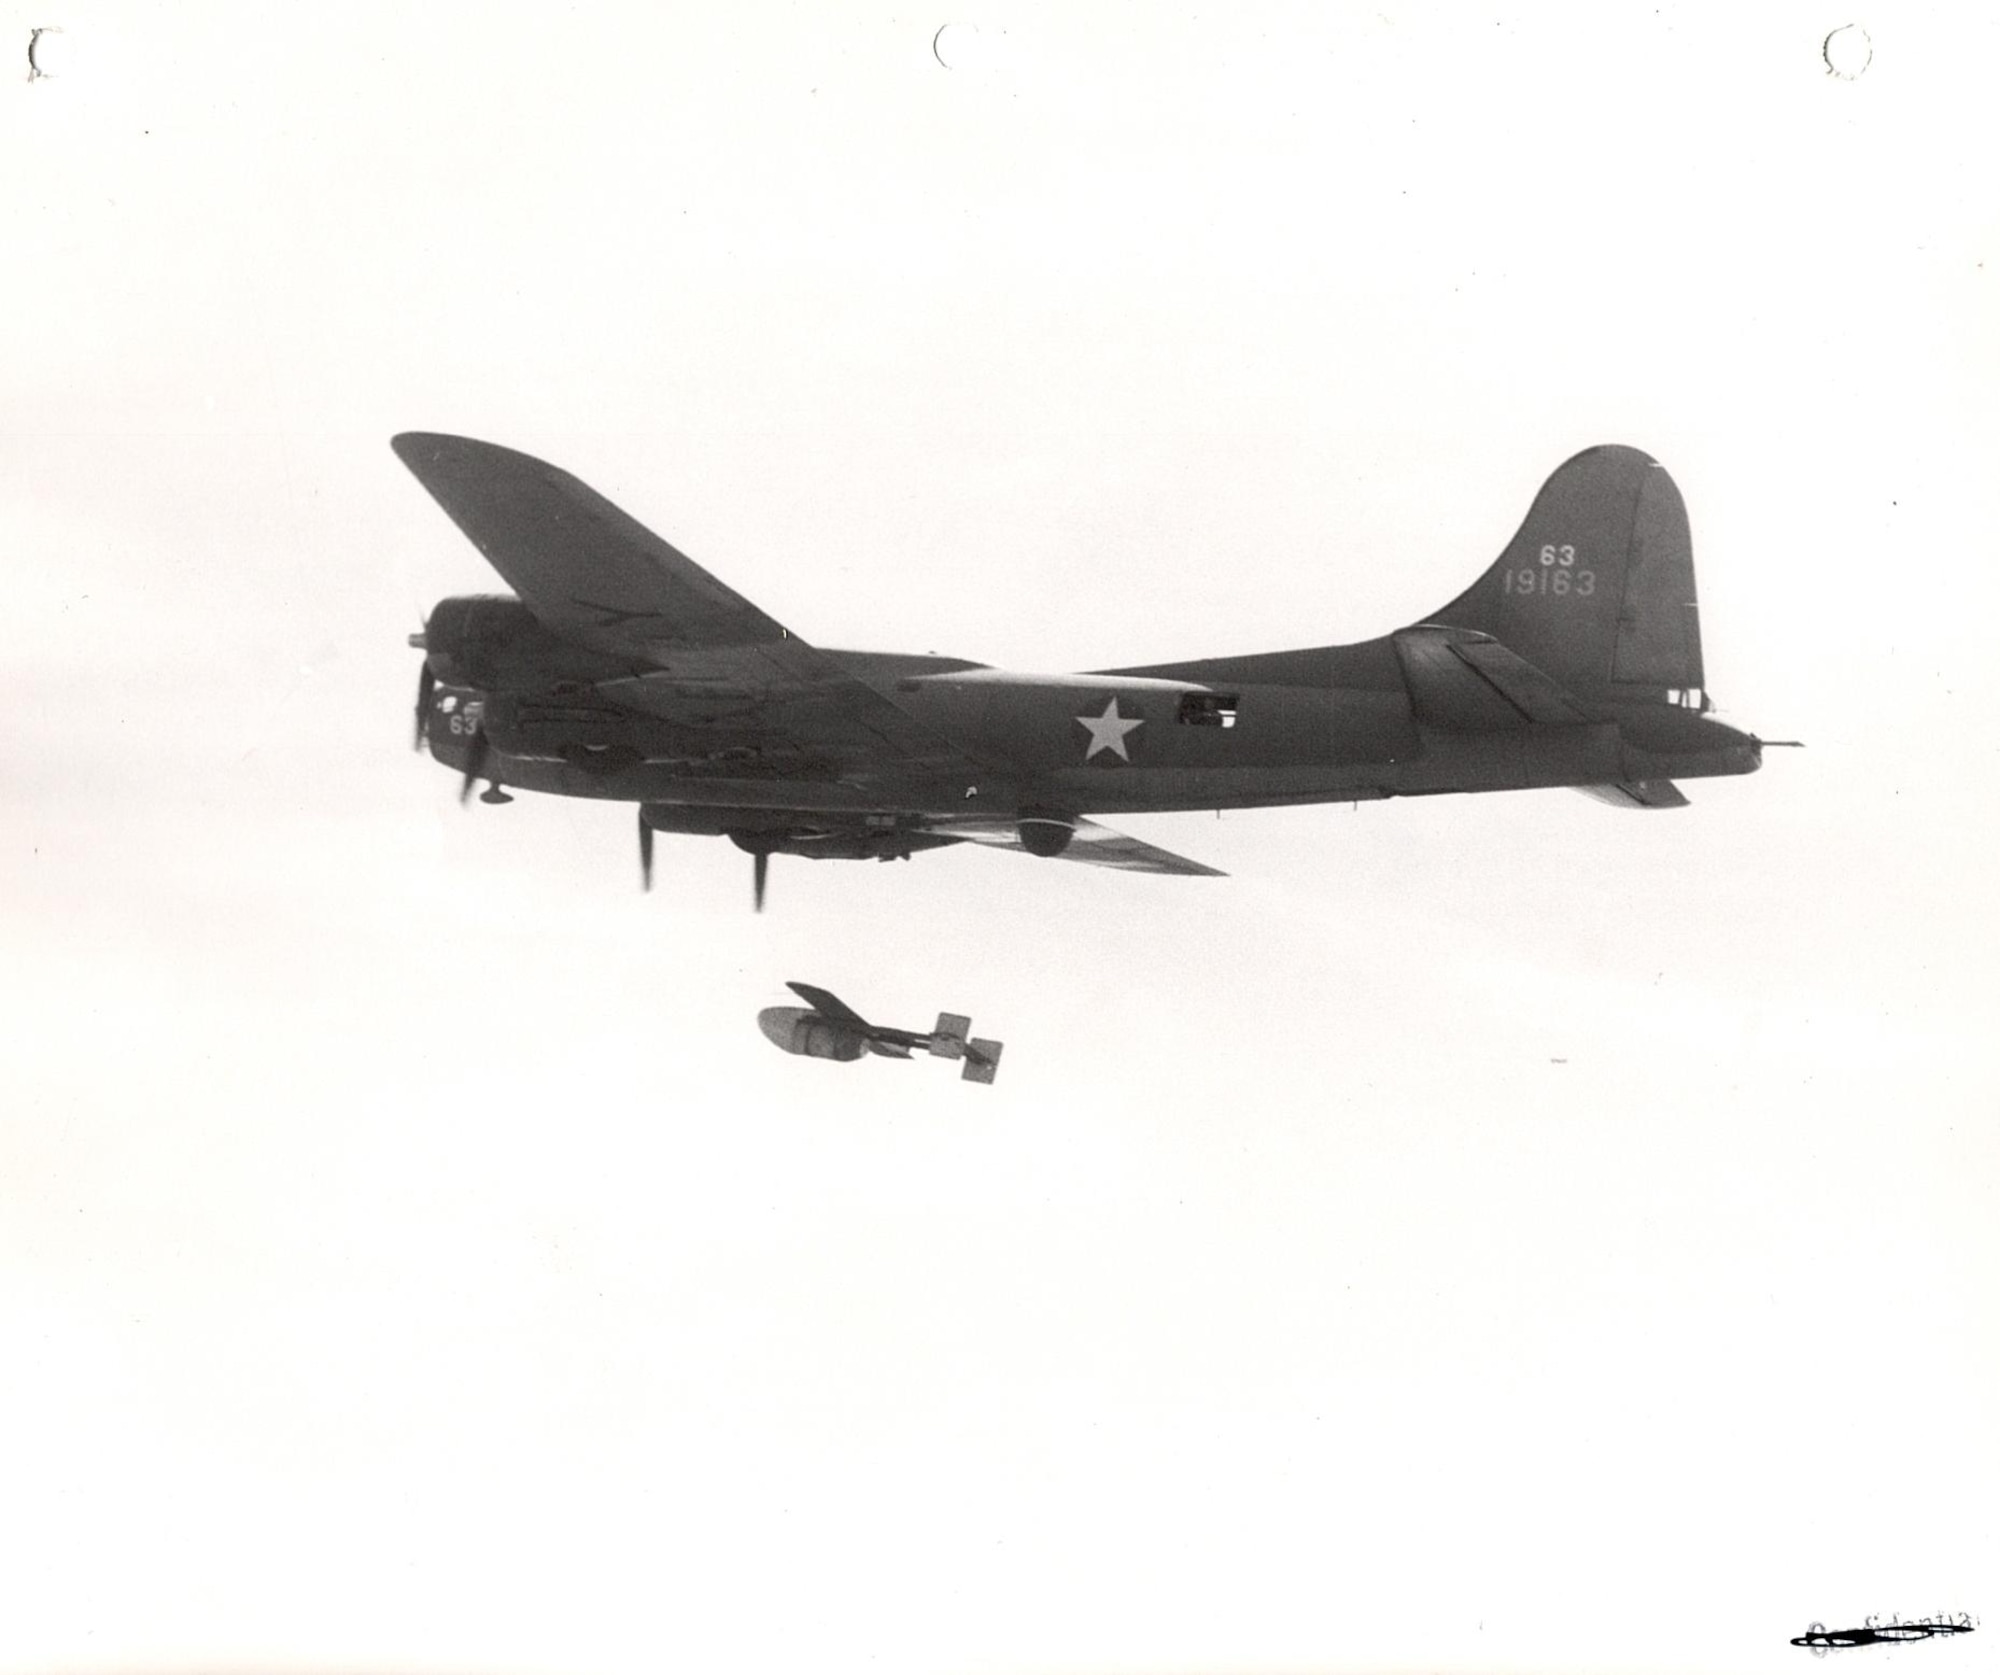 GB-1 dropped from a B-17.